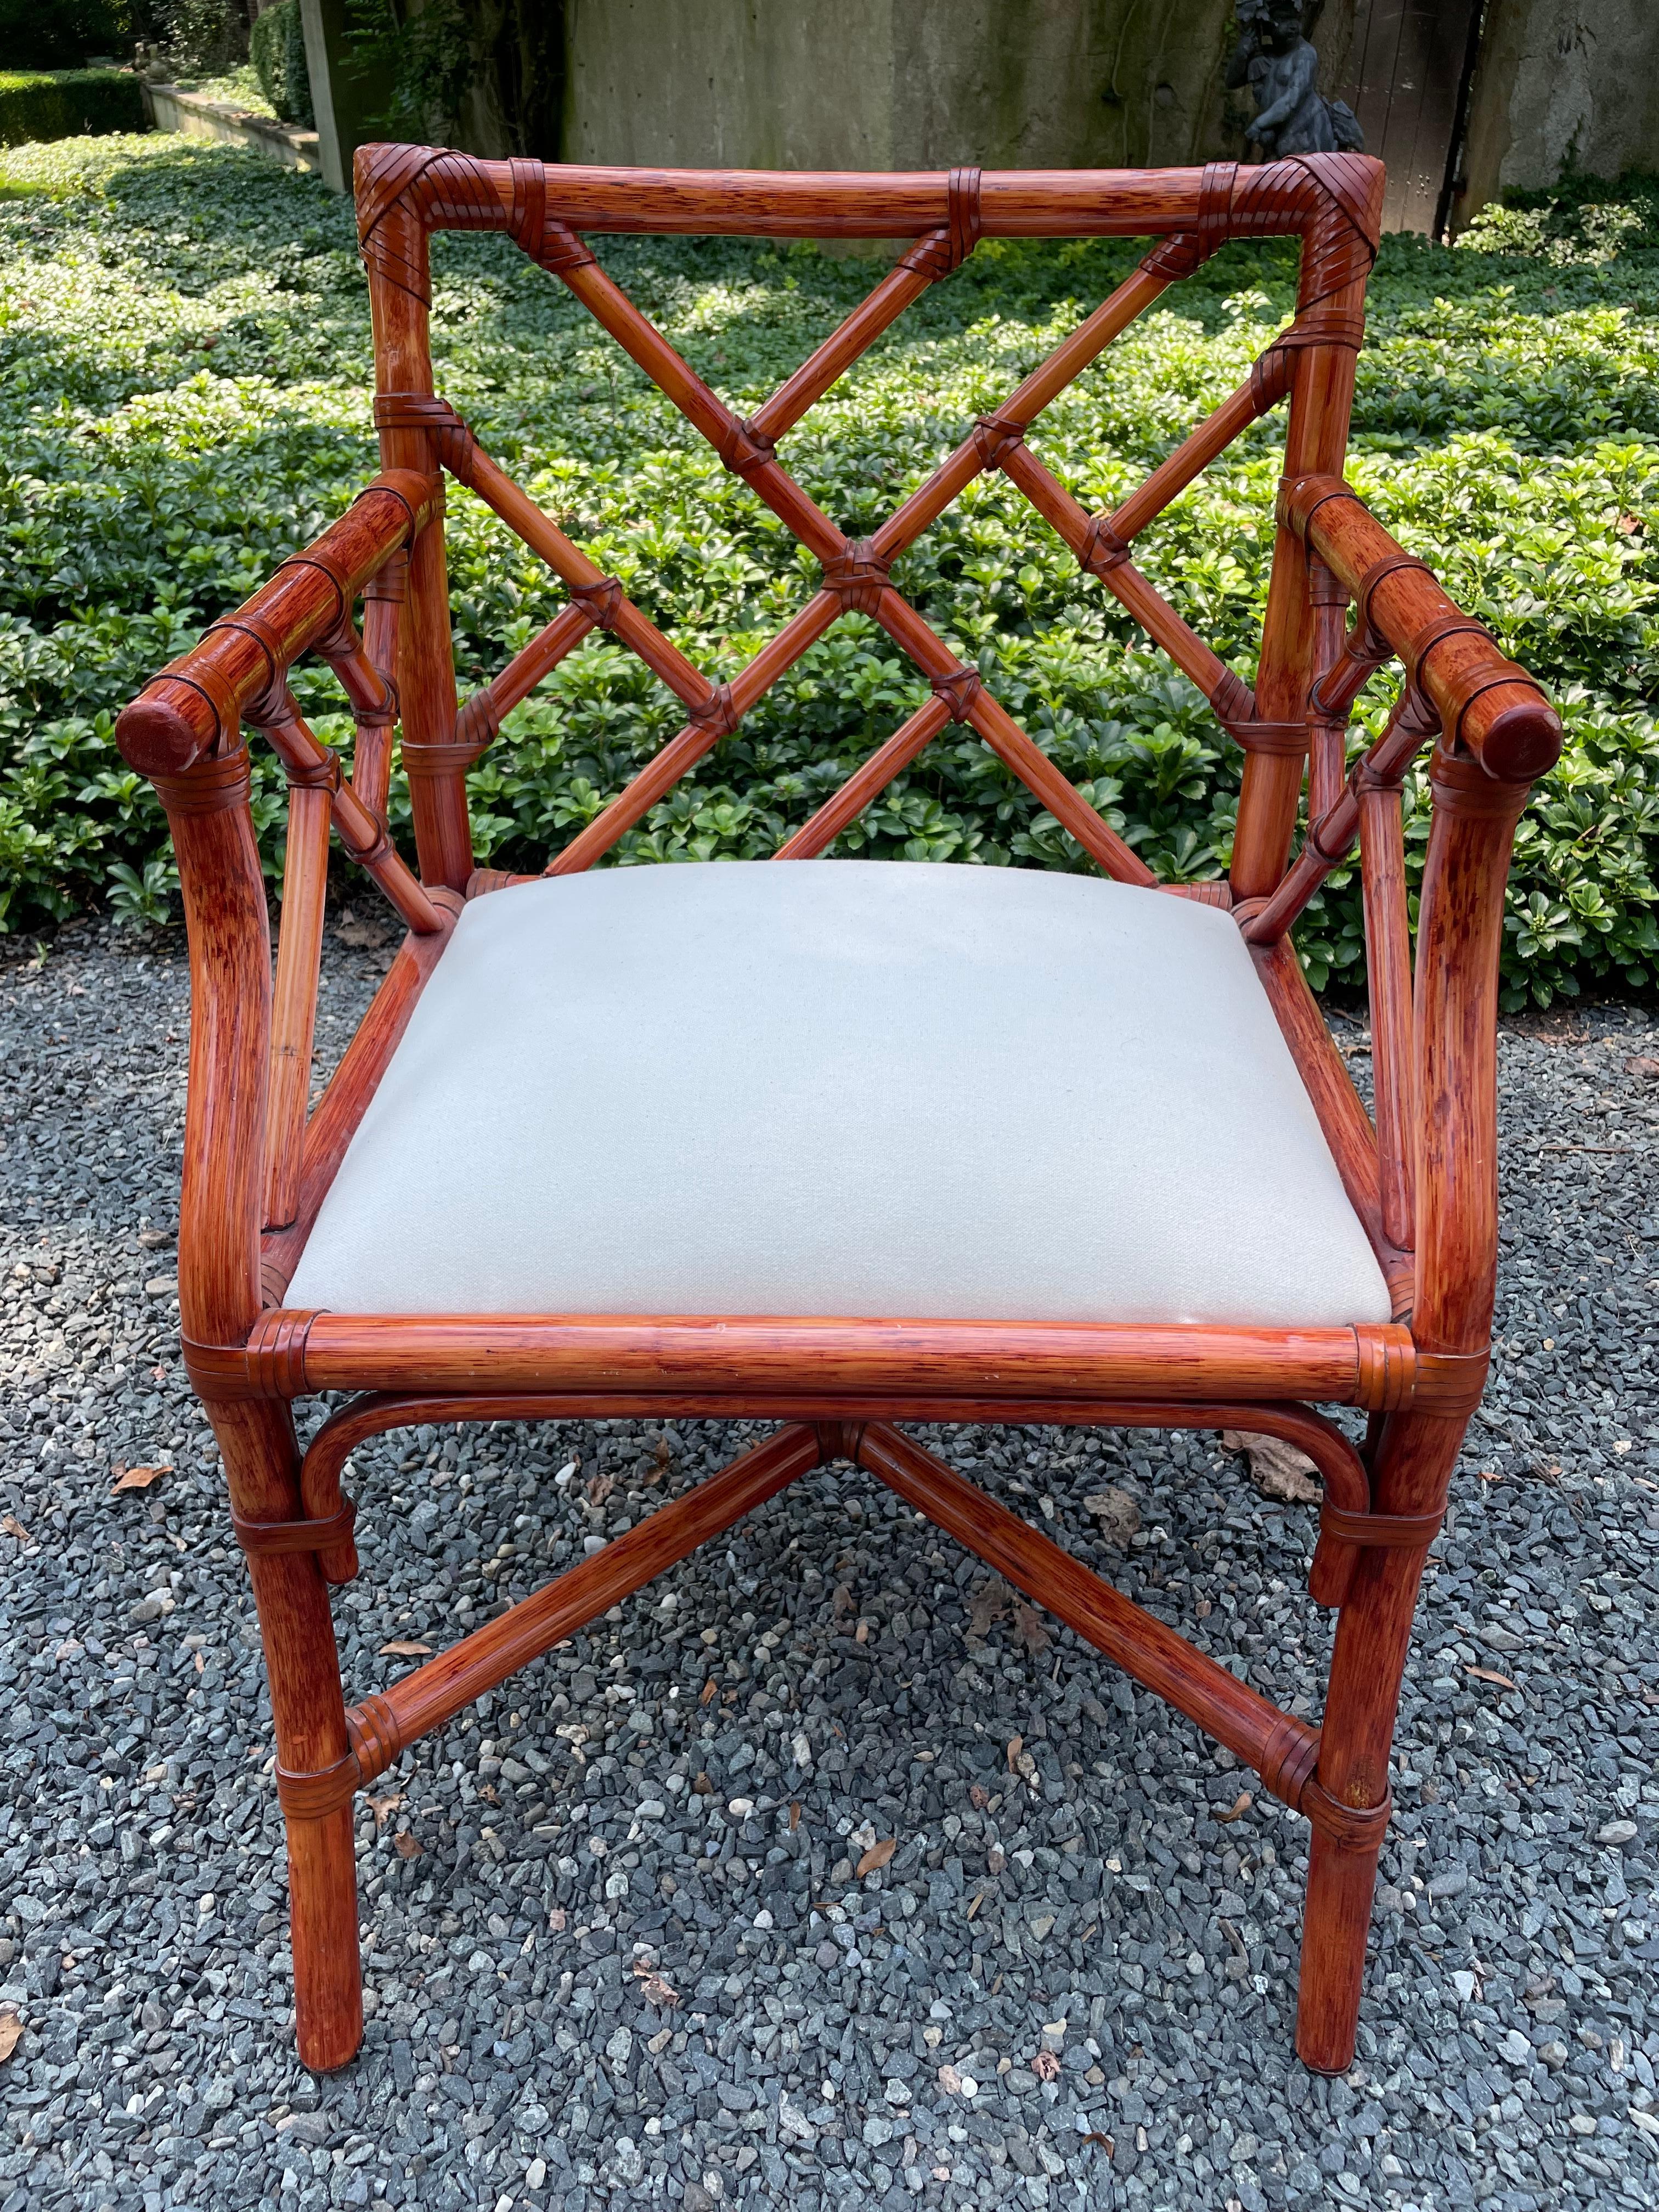 A glamorous classic set of six Chinese Chippendale French rattan chairs with cushioned seats. There are four side chairs and two open arm chairs. The rattan is in excellent condition and has a wonderful toffee colored patina. The upholstered seats